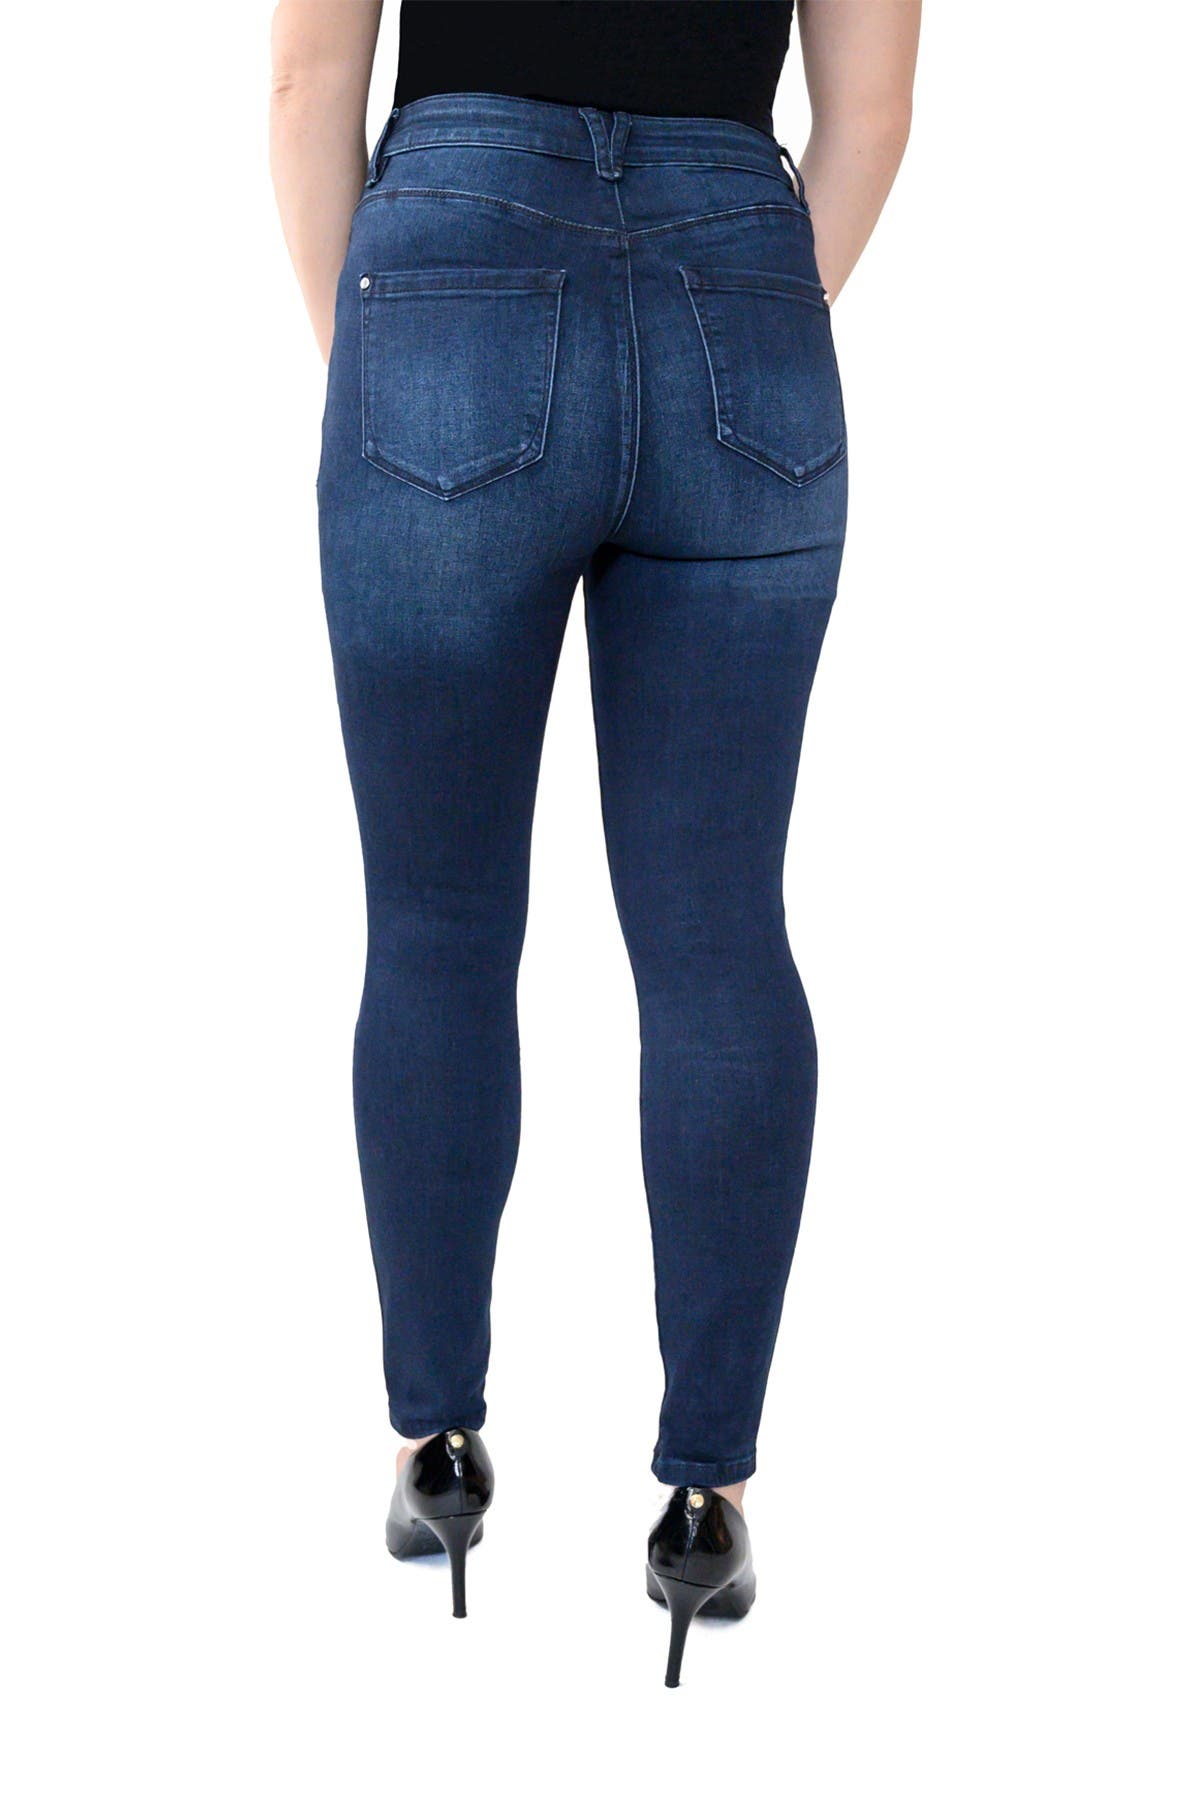 curve appeal jeans total control